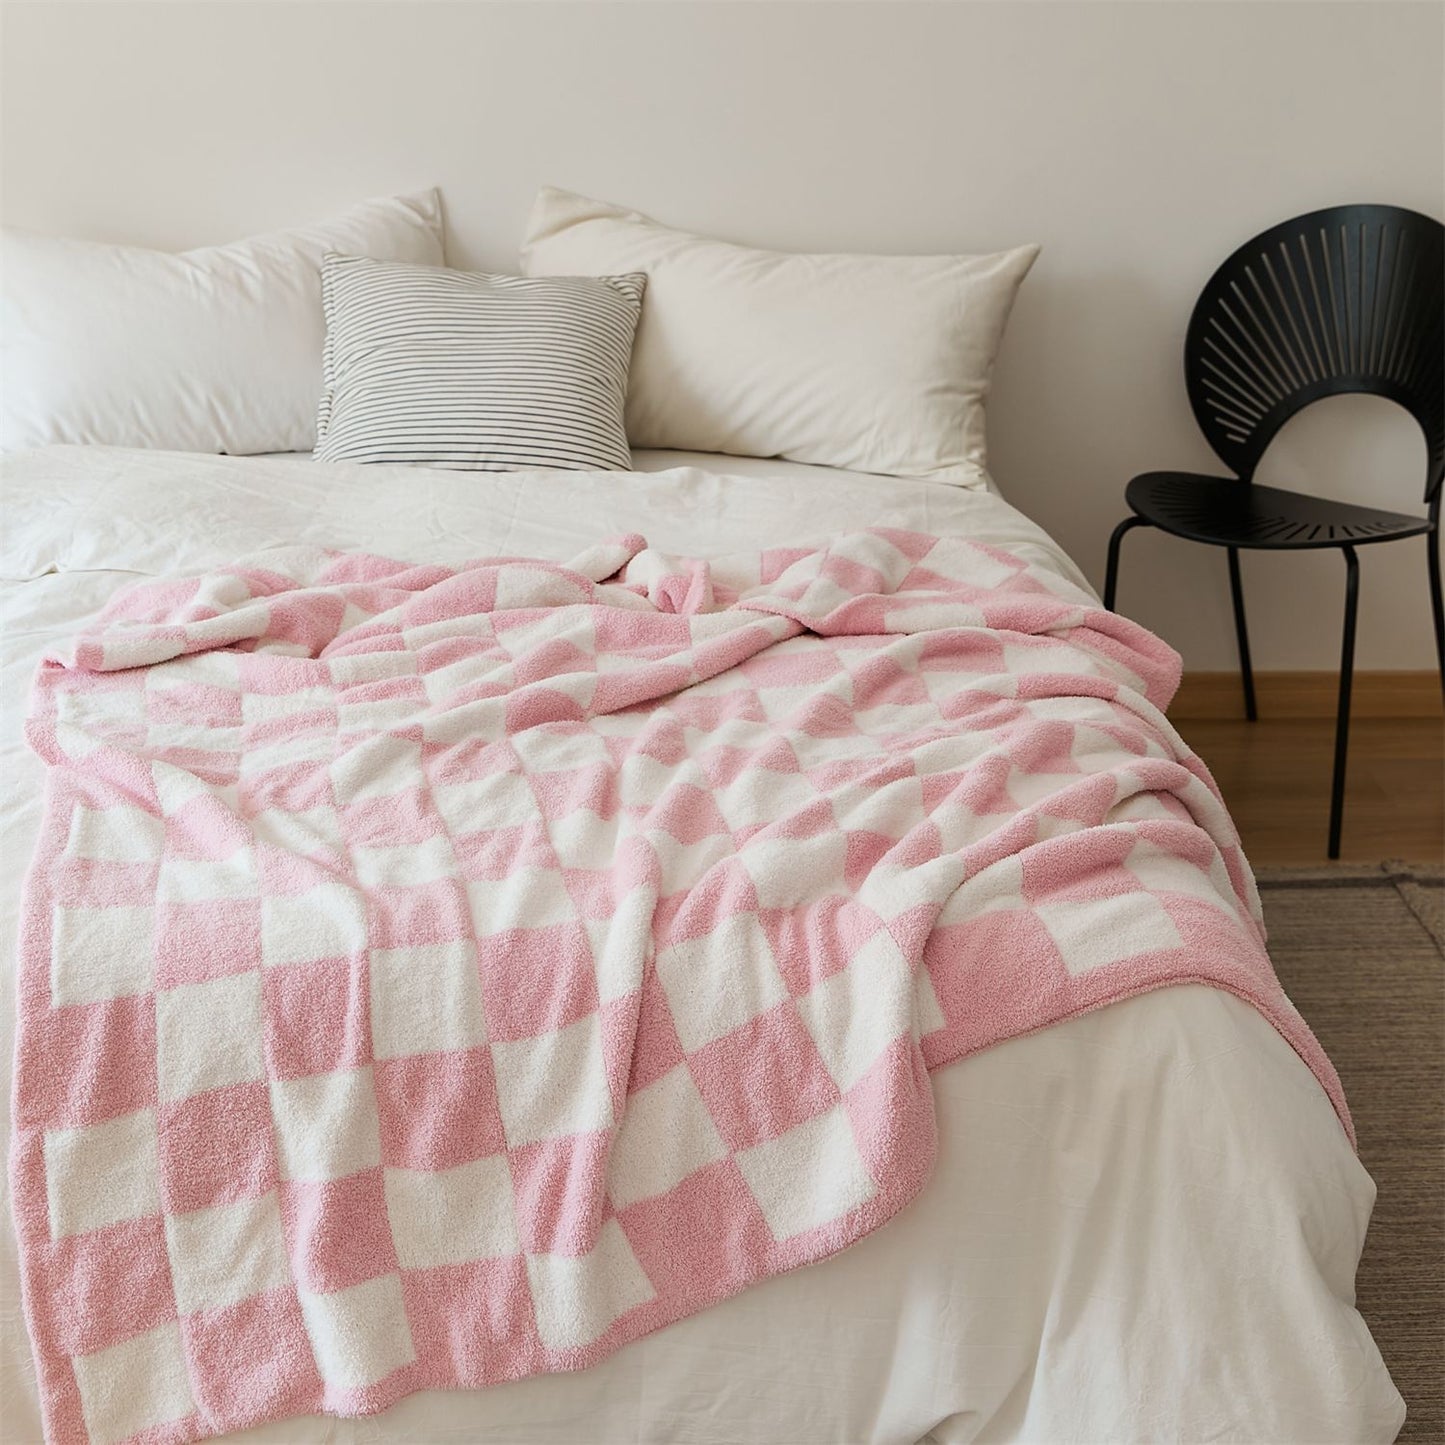 Checkered Throw Blanket Super Soft Luxurious Warm Blanket for Couch Pink